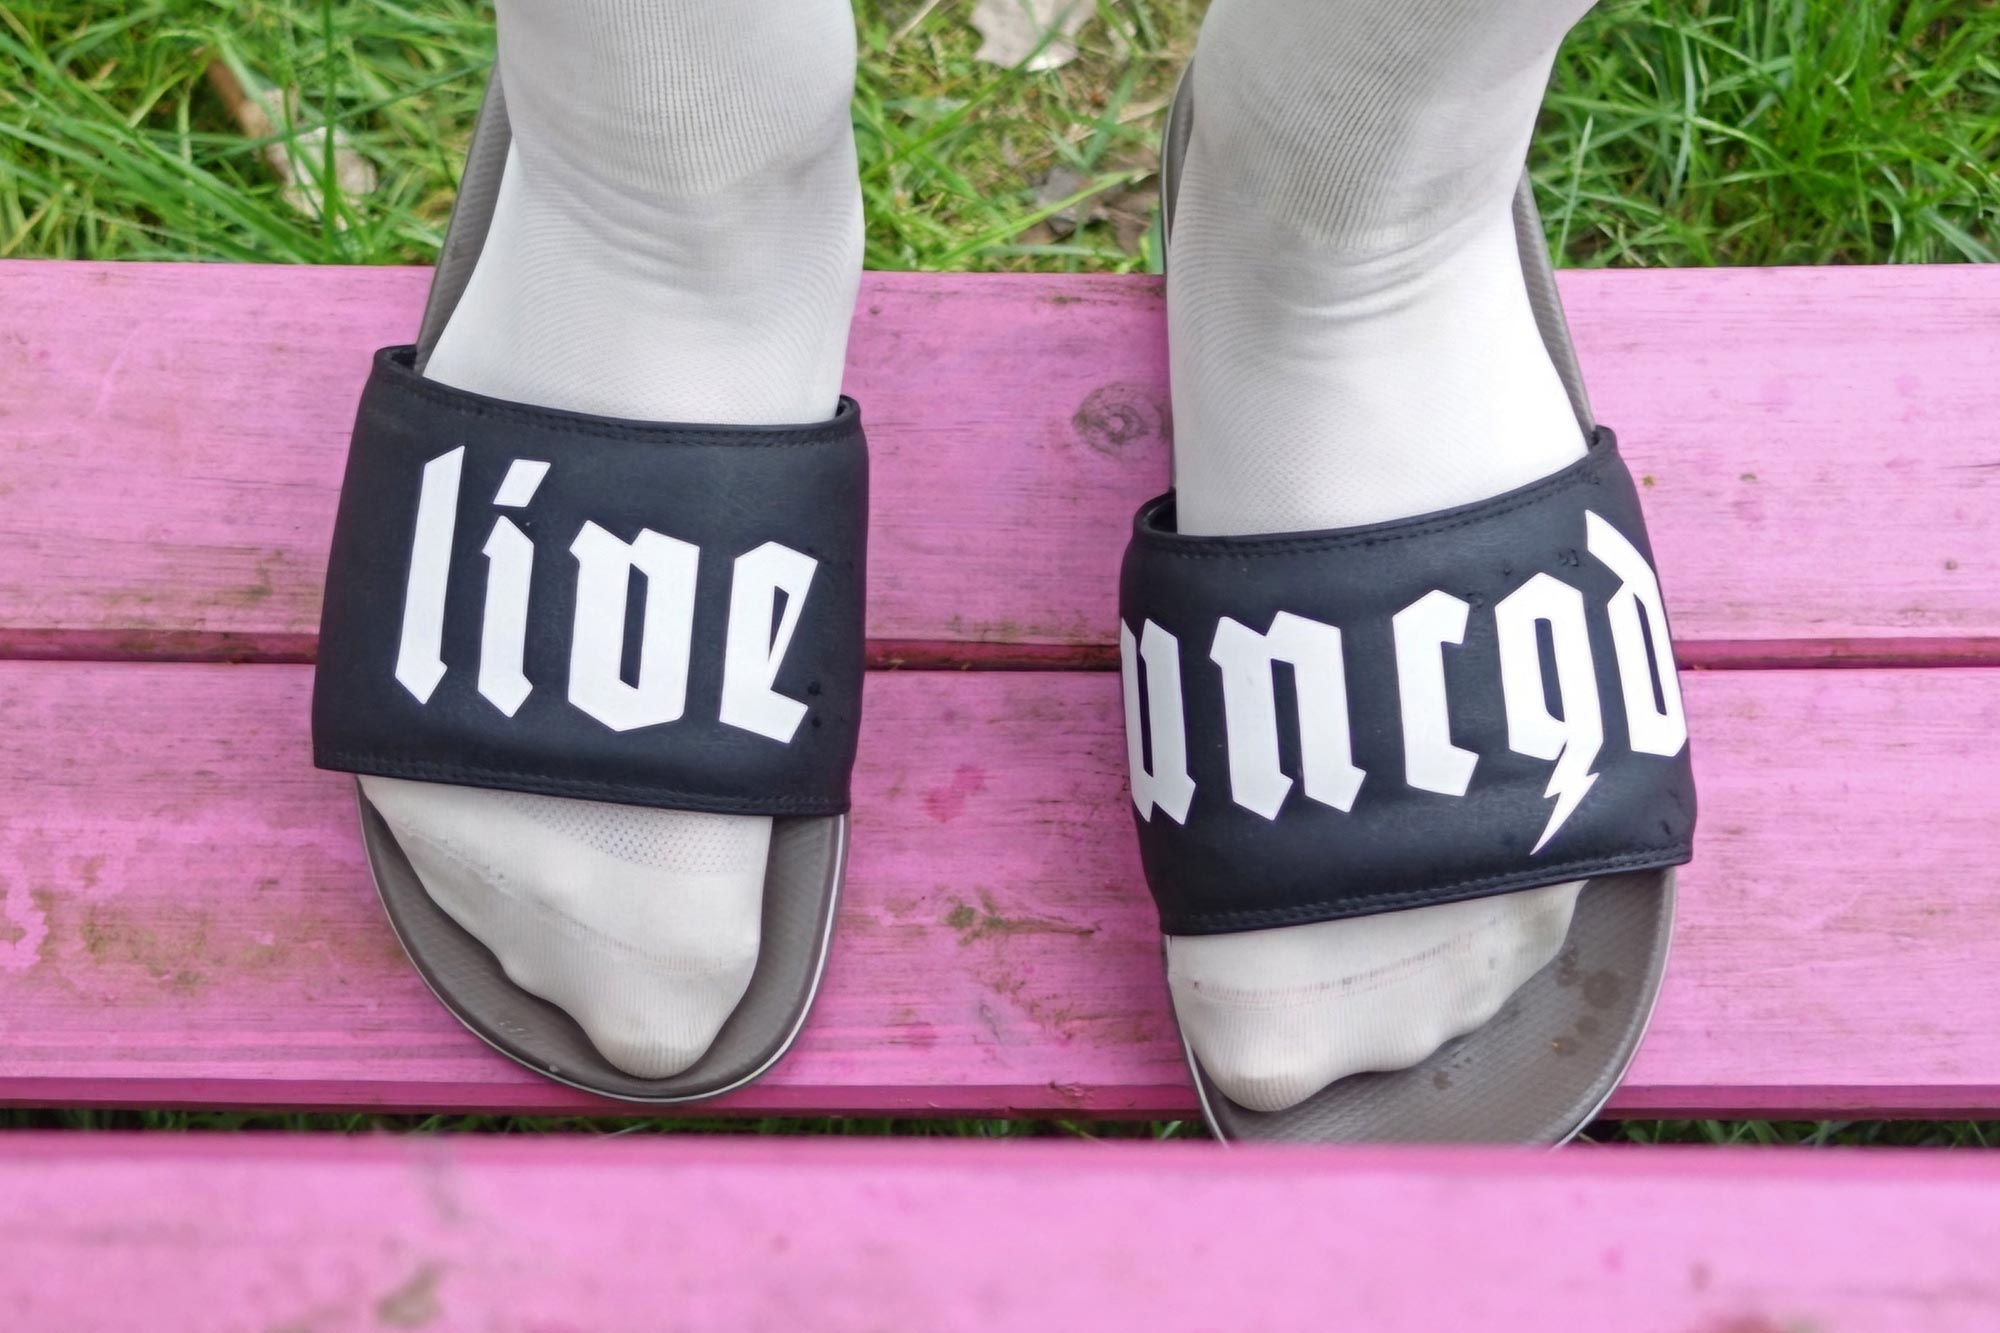 YT x Vans Live Uncaged Off The Wall limited edition shoe collaboration, La Costa slides